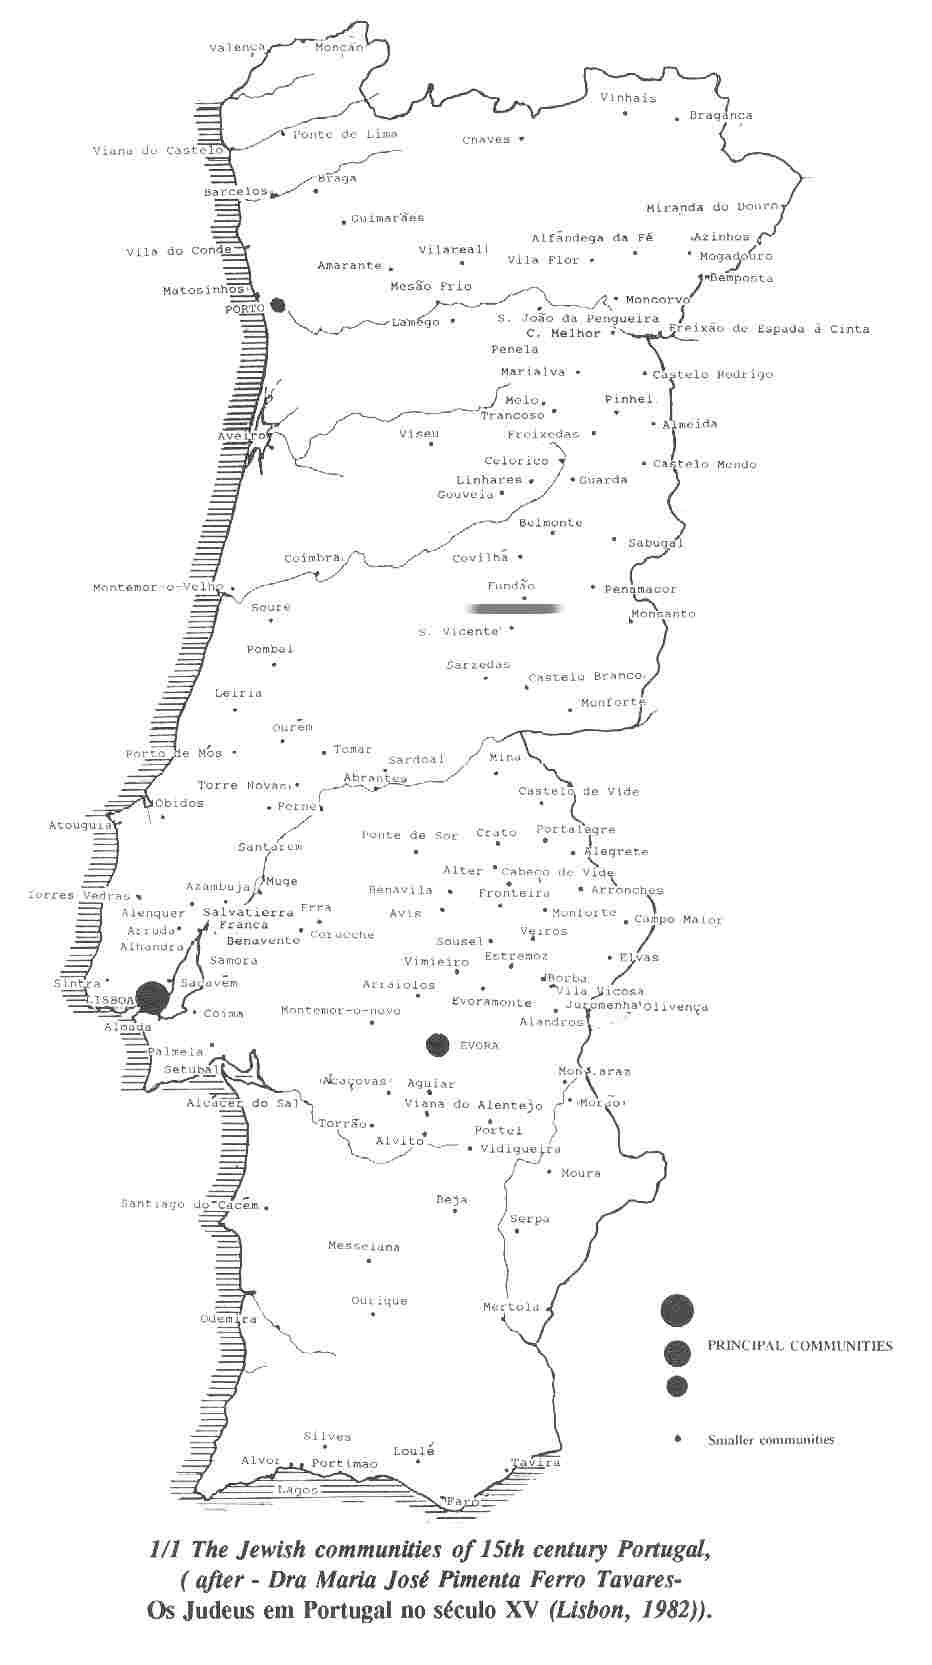 A Map of Portugal showing Jewish communities